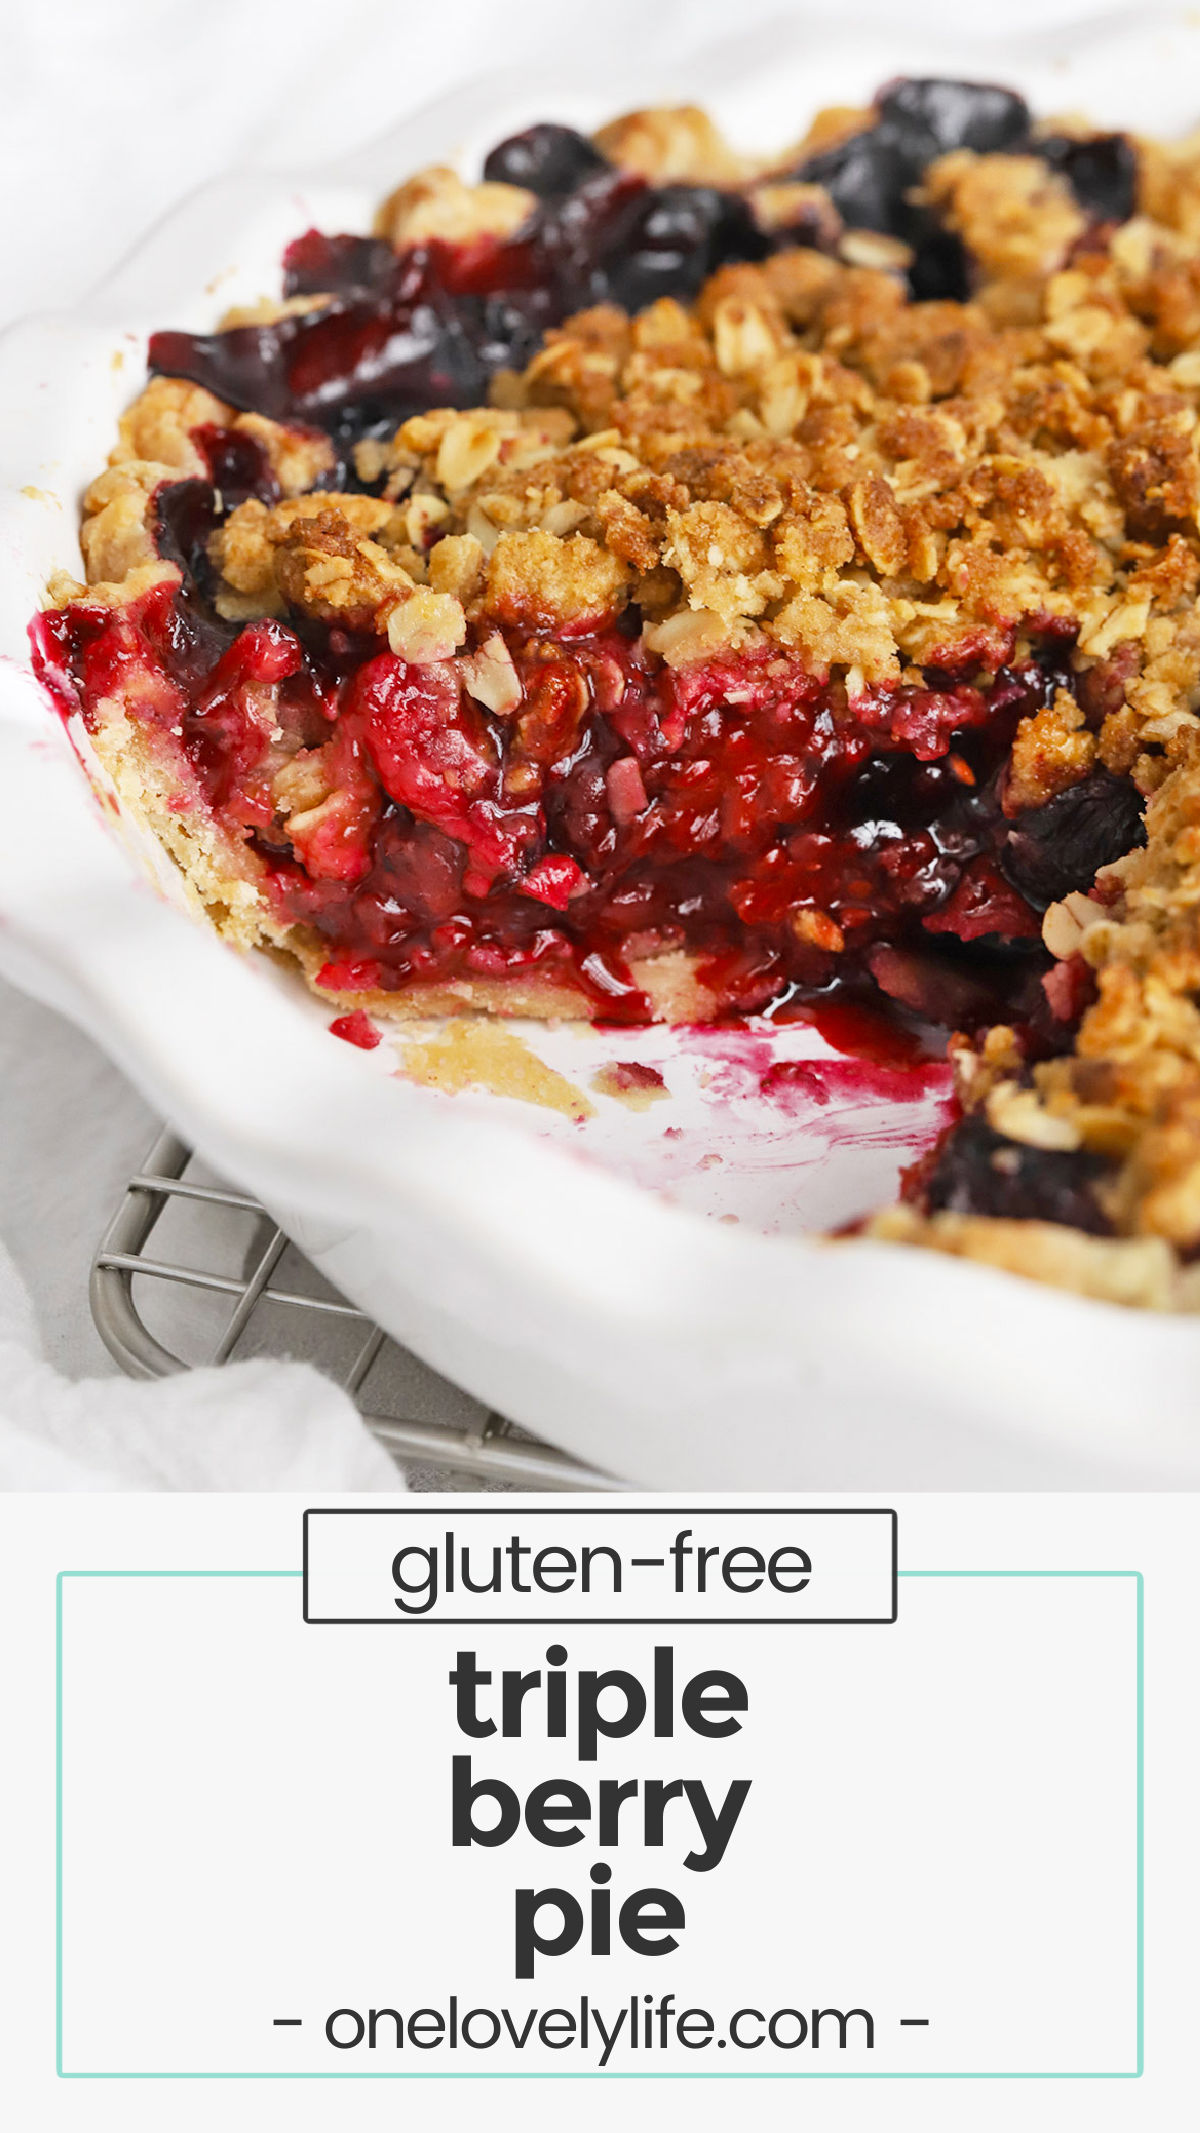 Triple Berry Crumble Pie - This berry crumble pie features a bright, tangy berry filling & gorgeous crumble topping you'll fall in love with at first bite! (Gluten-Free, Vegan-Friendly) // Berry Pie recipe // Mixed berry pie // mixed berry crumble pie // triple berry pie // berry pie with oat topping // gluten free pie // vegan pie // thanksgiving pie // christmas pie // 4th of July dessert // berry pie recipe